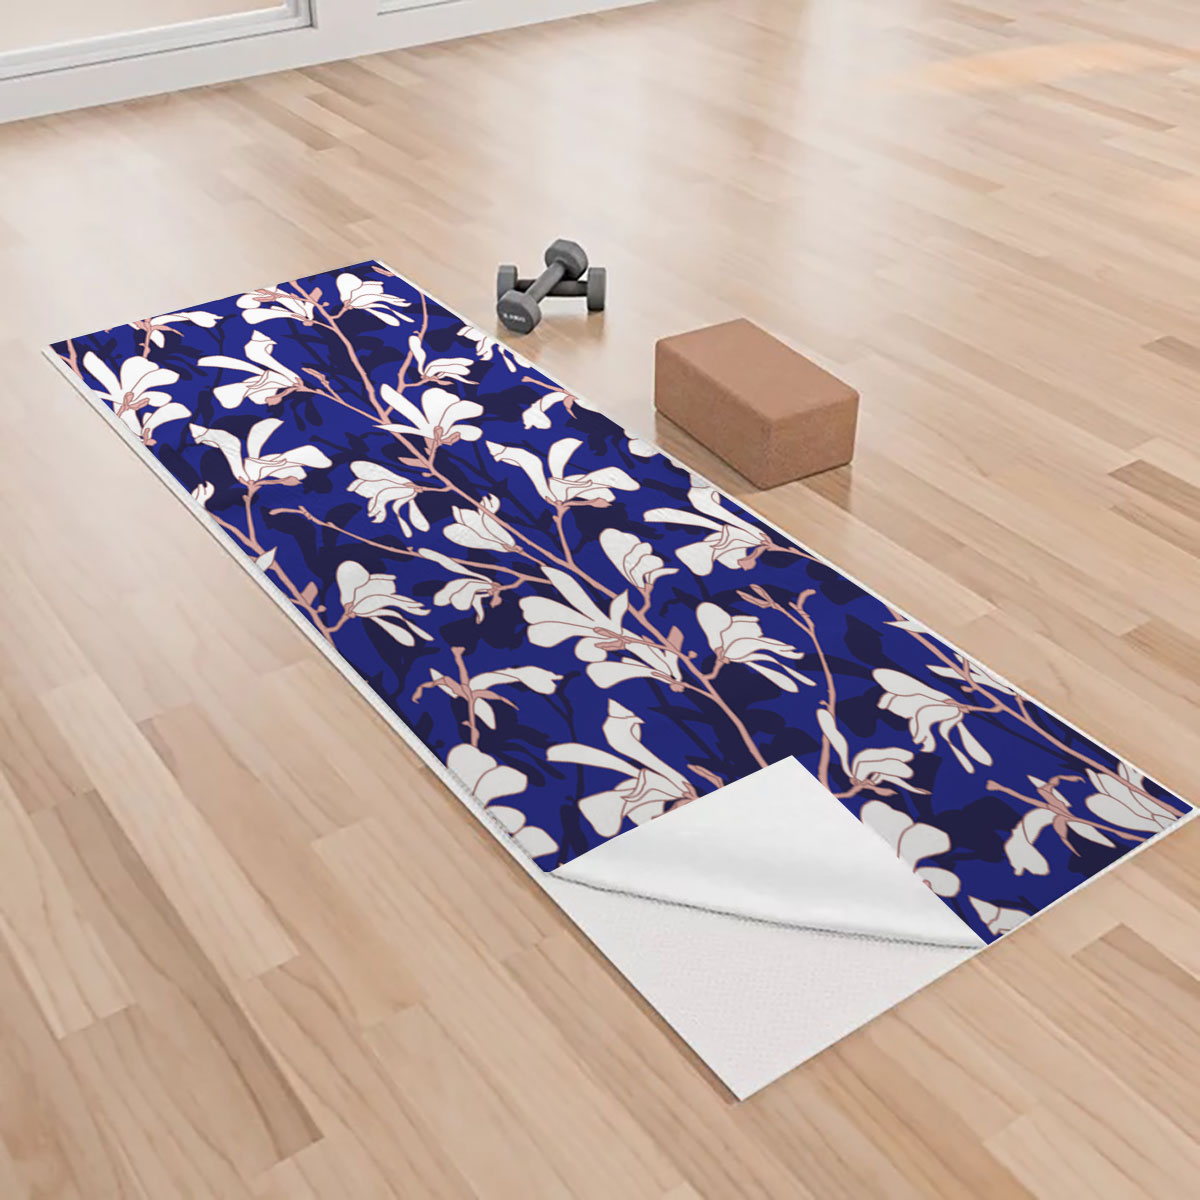 Blue Floral Background With White Magnolia Flower Yoga Towels